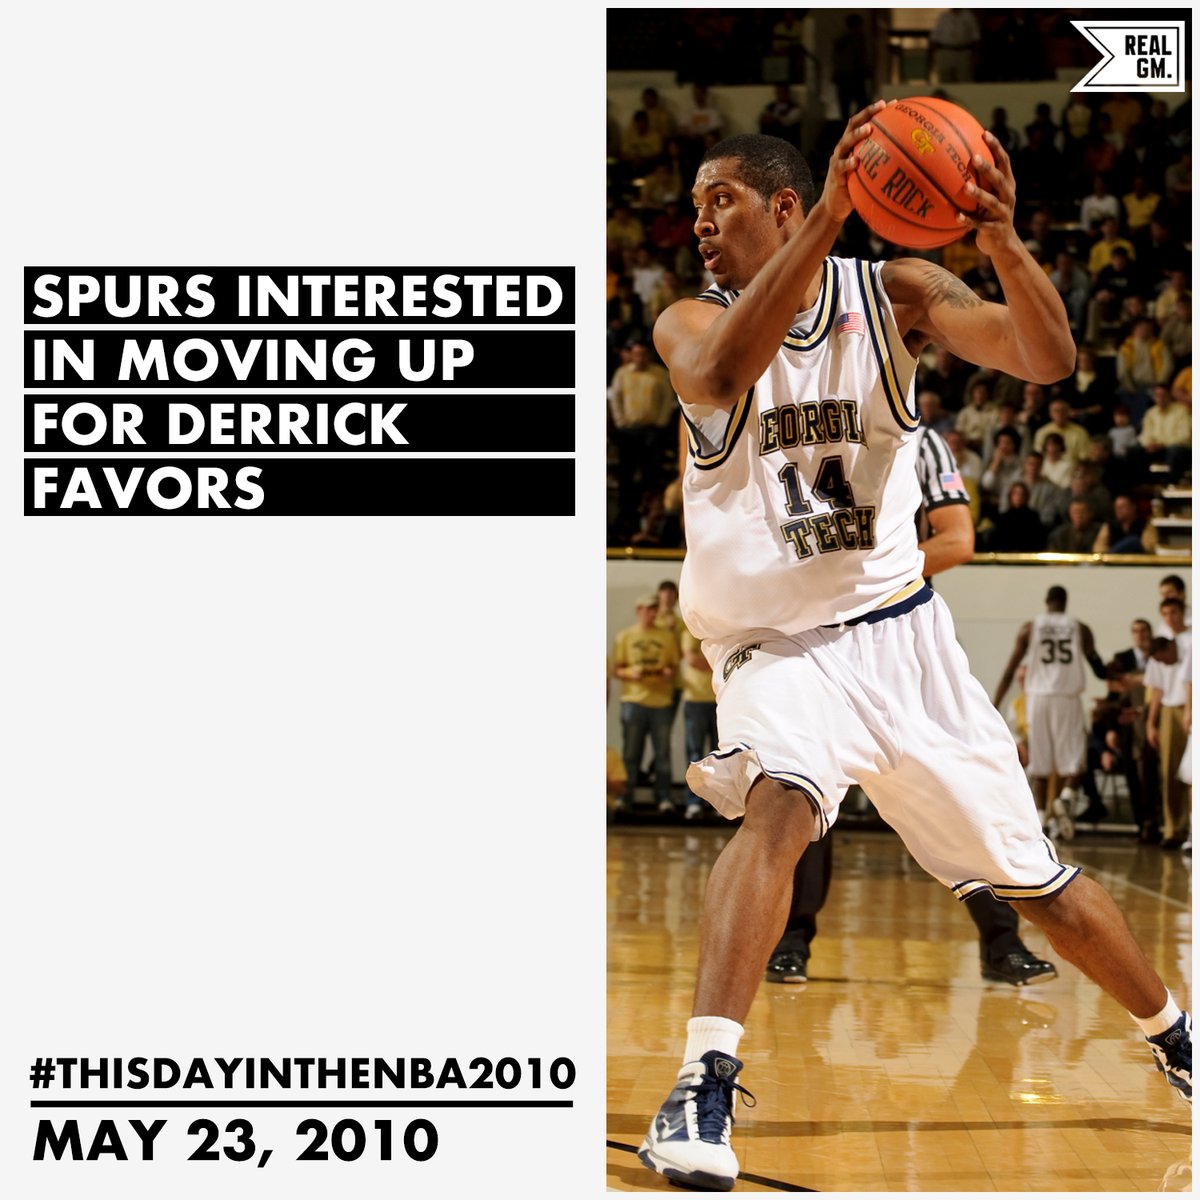  #ThisDayInTheNBA2010May 23, 2010Spurs Interested In Moving Up For Derrick Favors https://basketball.realgm.com/wiretap/204073/Spurs-Interested-In-Moving-Up-For-Derrick-Favors